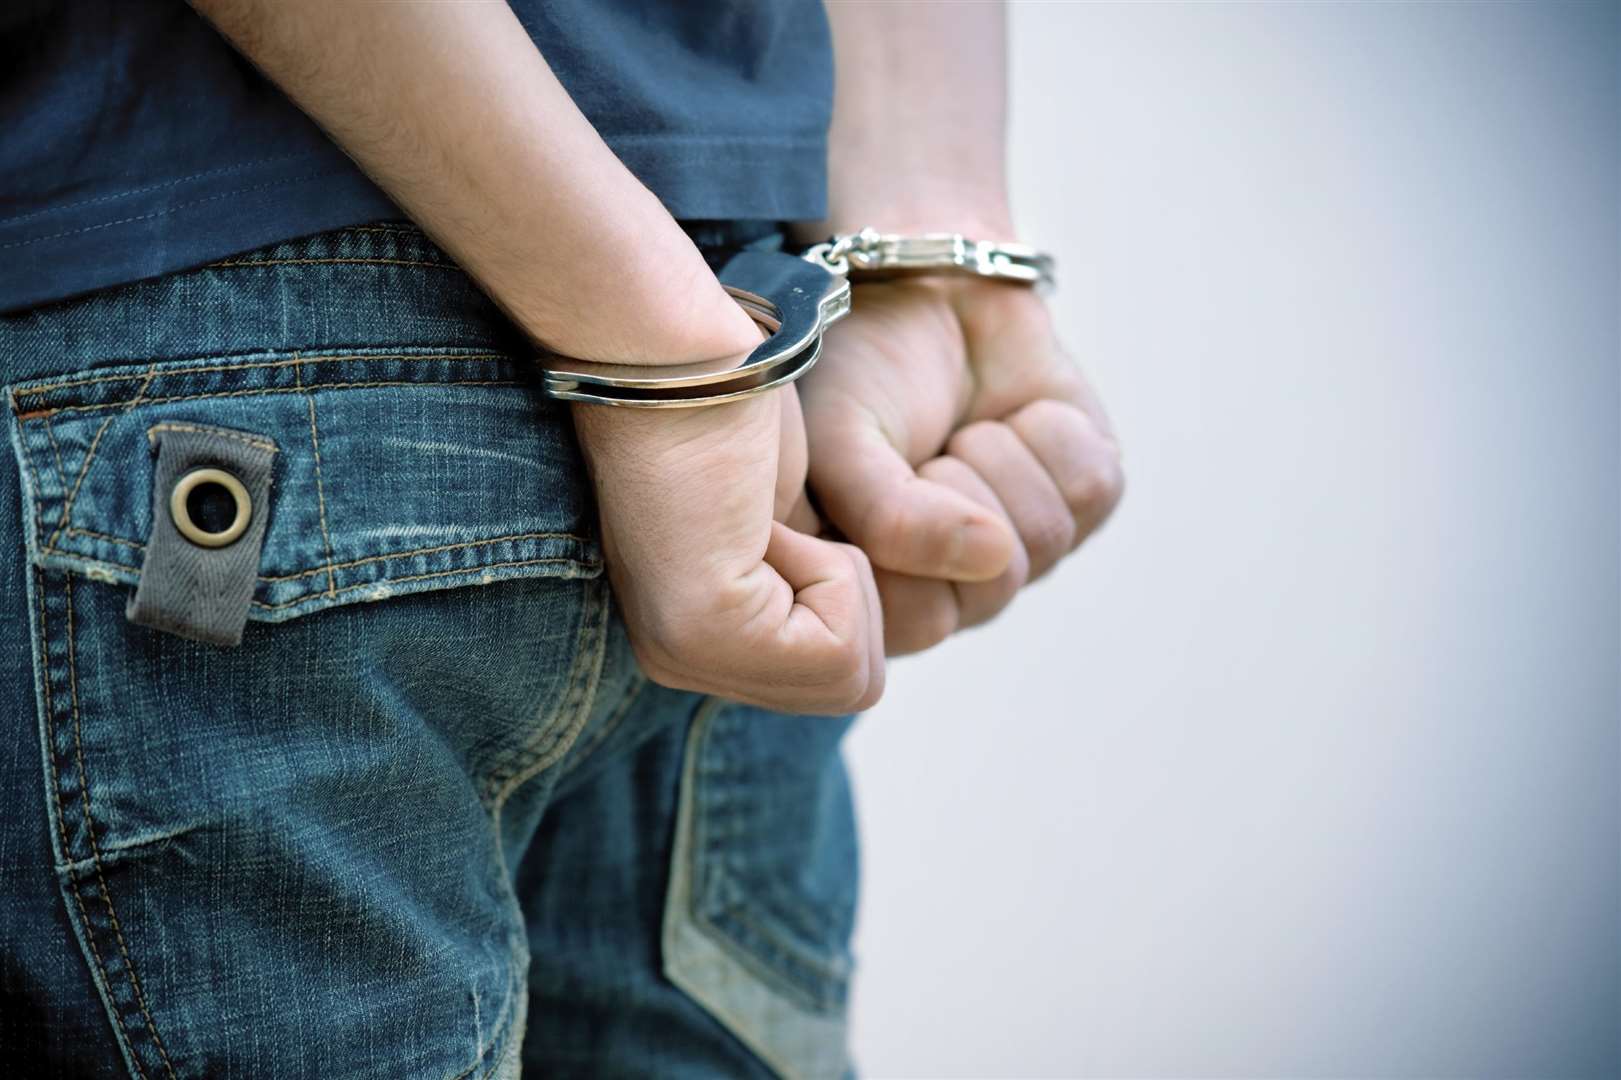 MUST CREDIT Picture: iStock.comKMG GROUP USE ONLYConditions of Use: Slug: badcells GM 090215Caption: Man in handcuffs. Stock pictureLocation: GravesendCategory: Human InterestByline: iStock.comContact Name: iStock.comContact Email: Contact Phone: 0203 227 2713Uploaded By: Nikki WHITECopyright: iStock.comOriginal Caption: FM3642007 (3881730)